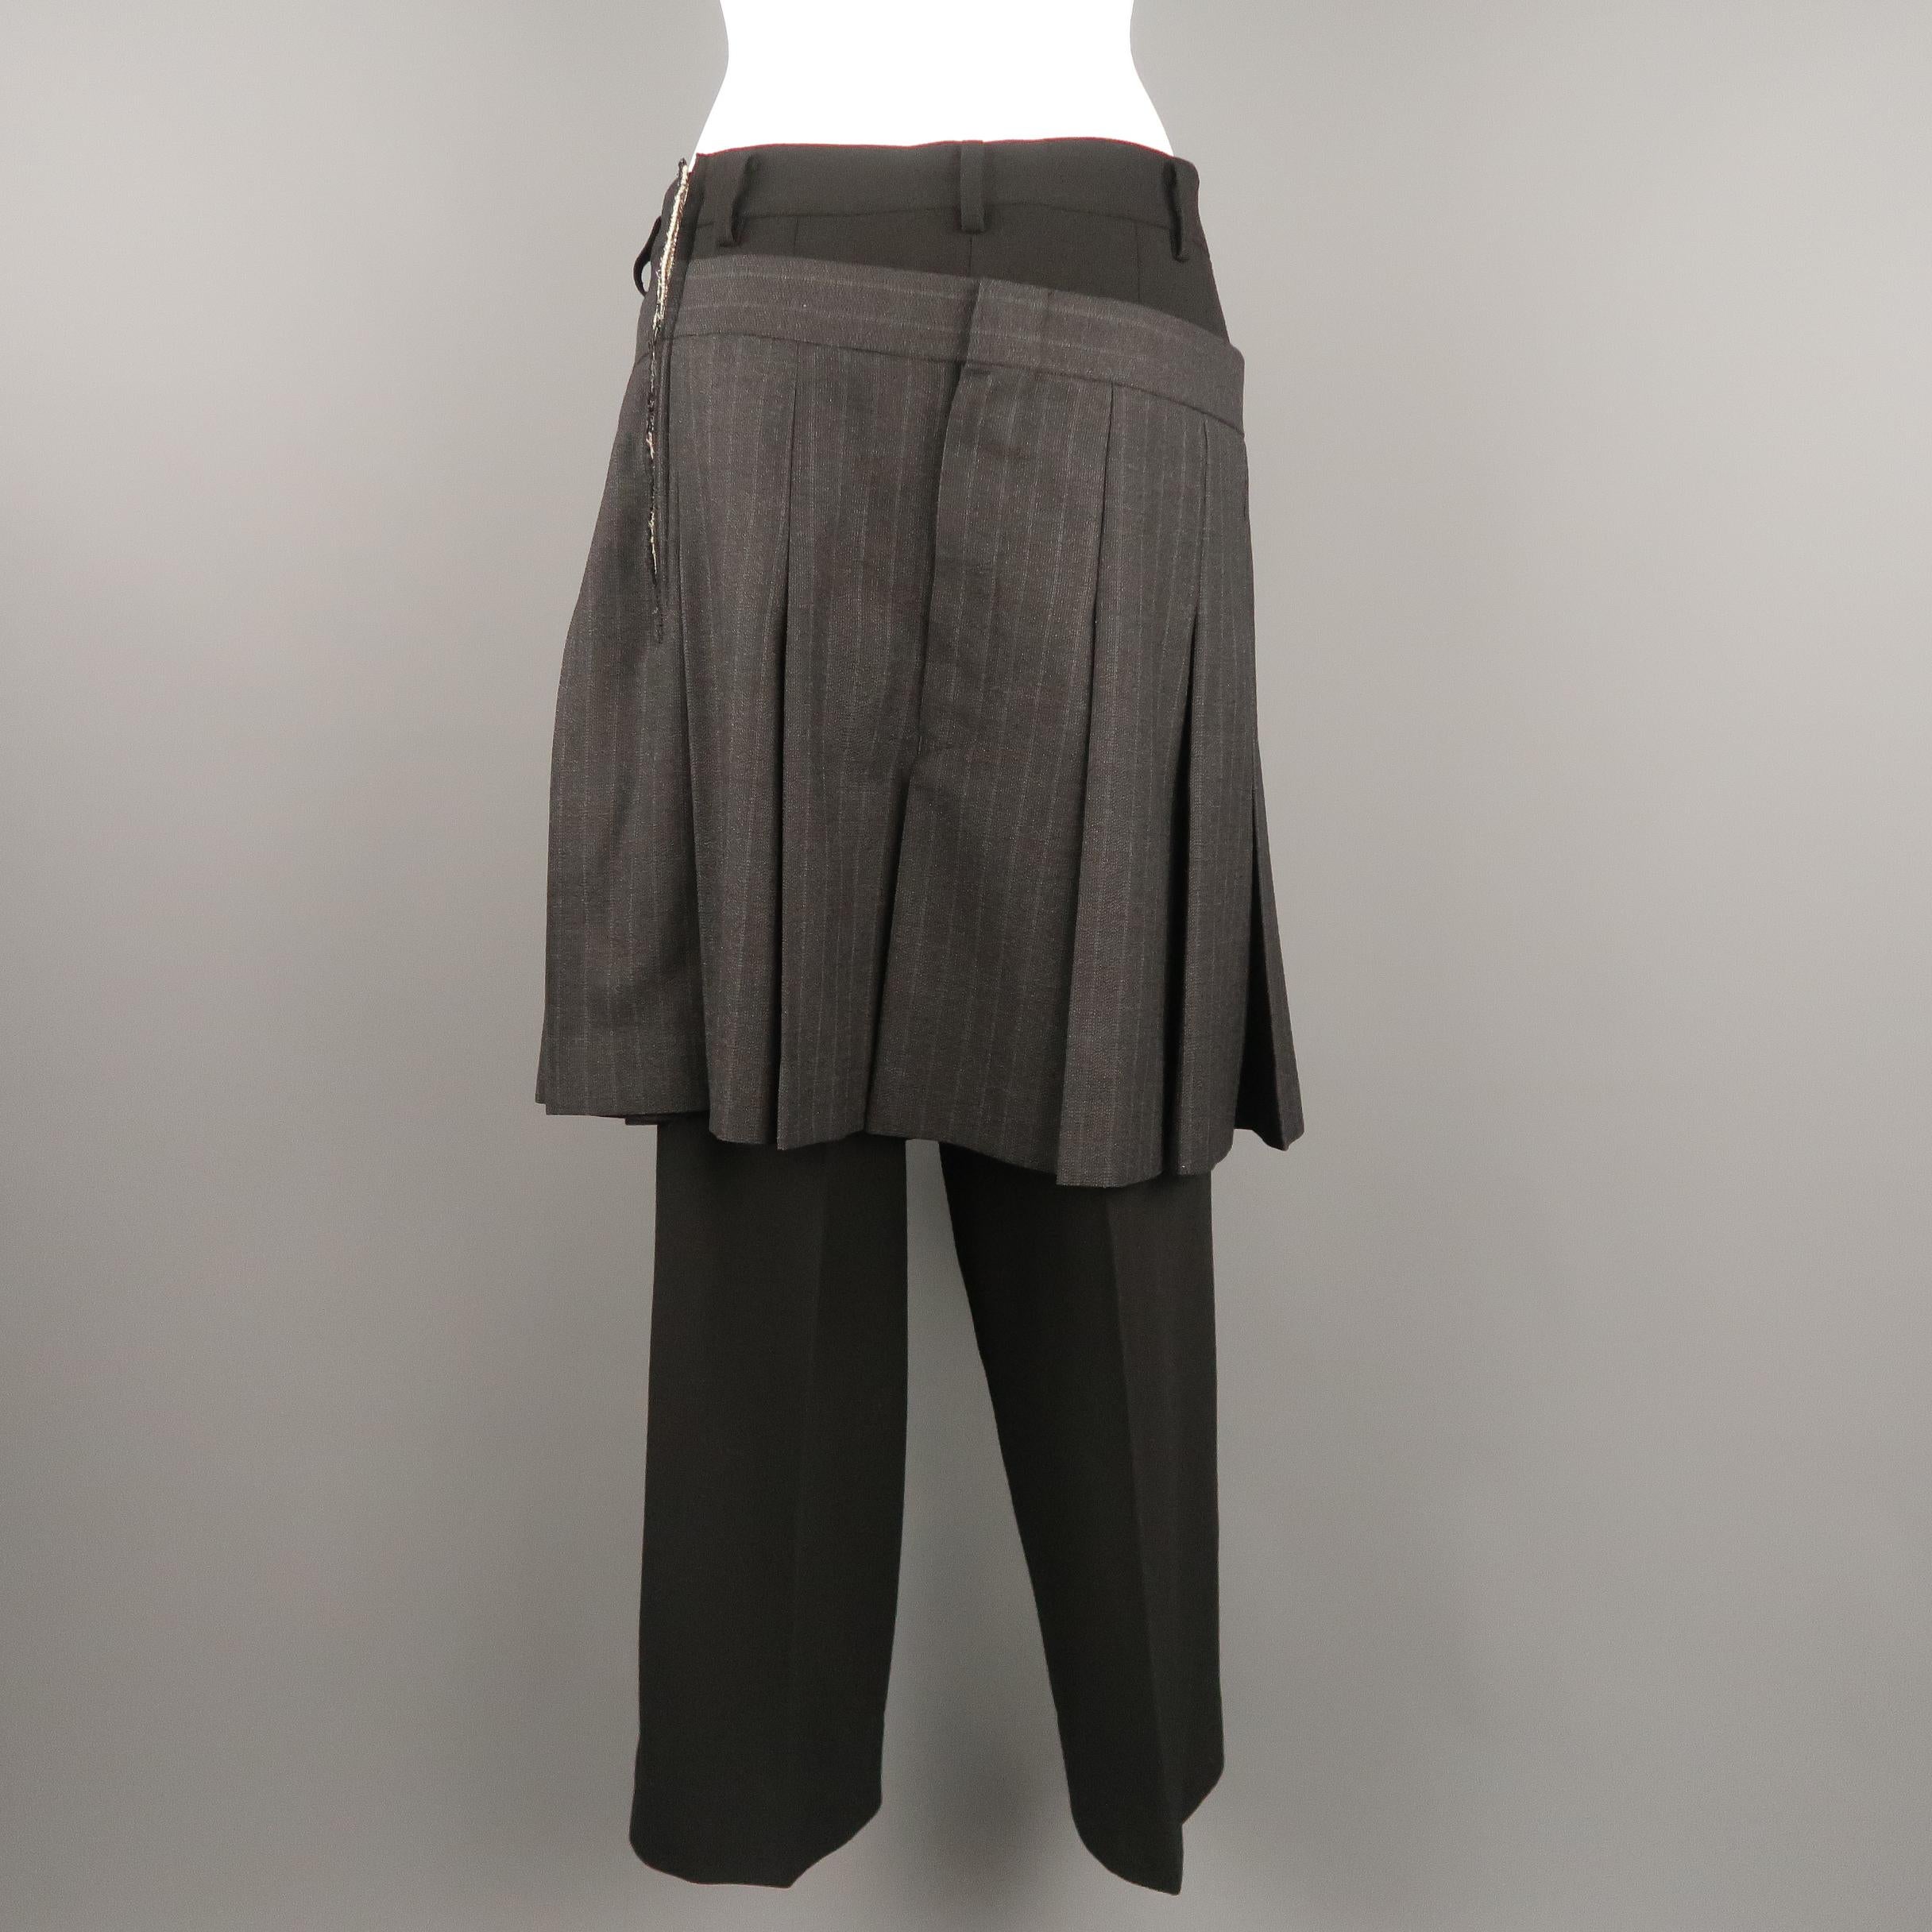 grey ruched skirt